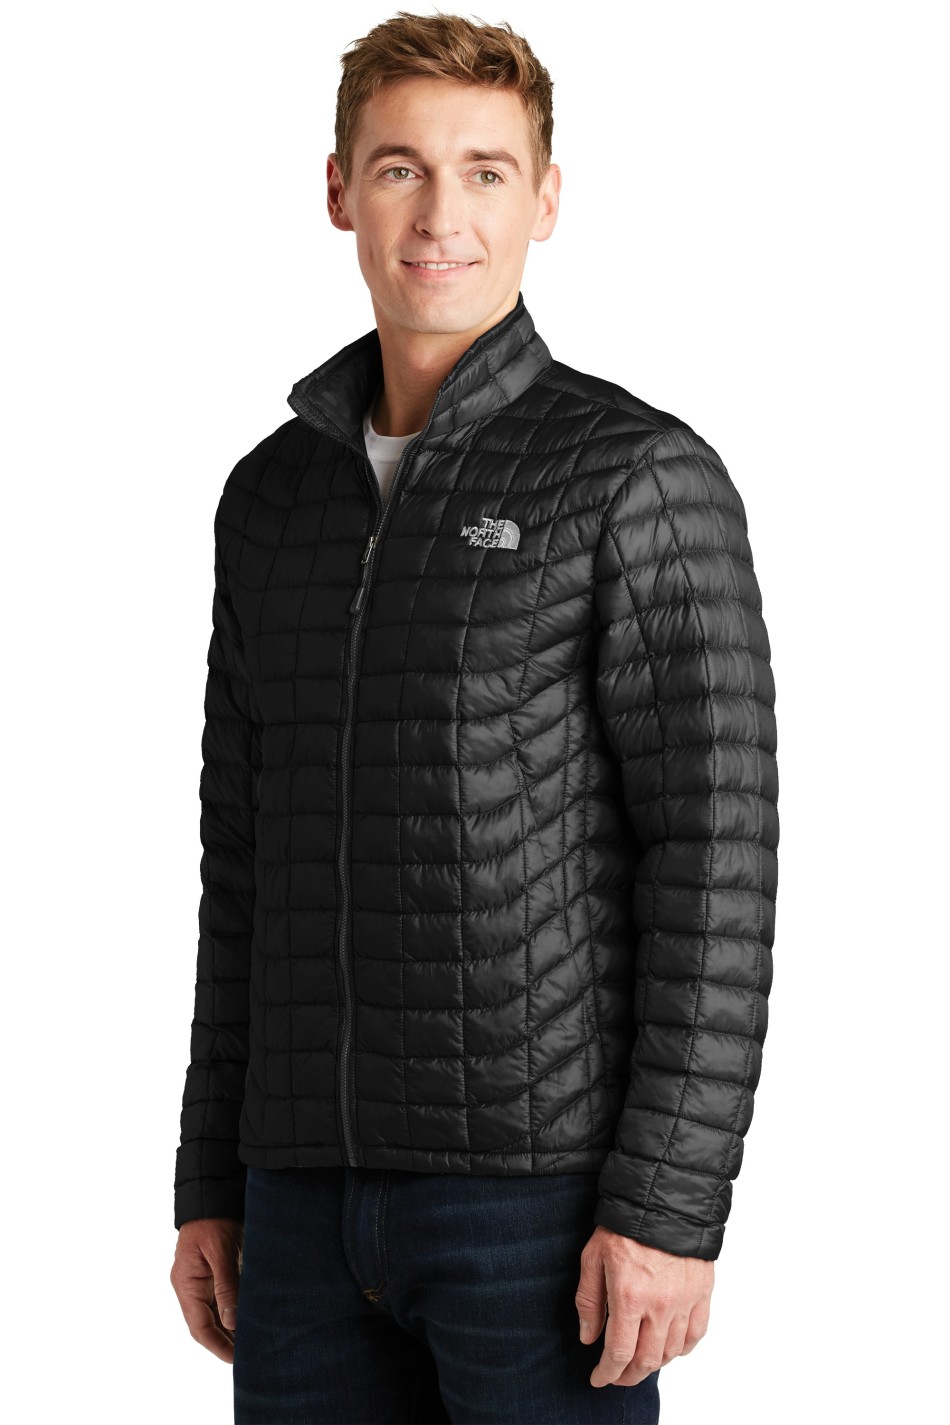 THE NORTH FACE ® Thermoball ™ Trekker Men's Jacket